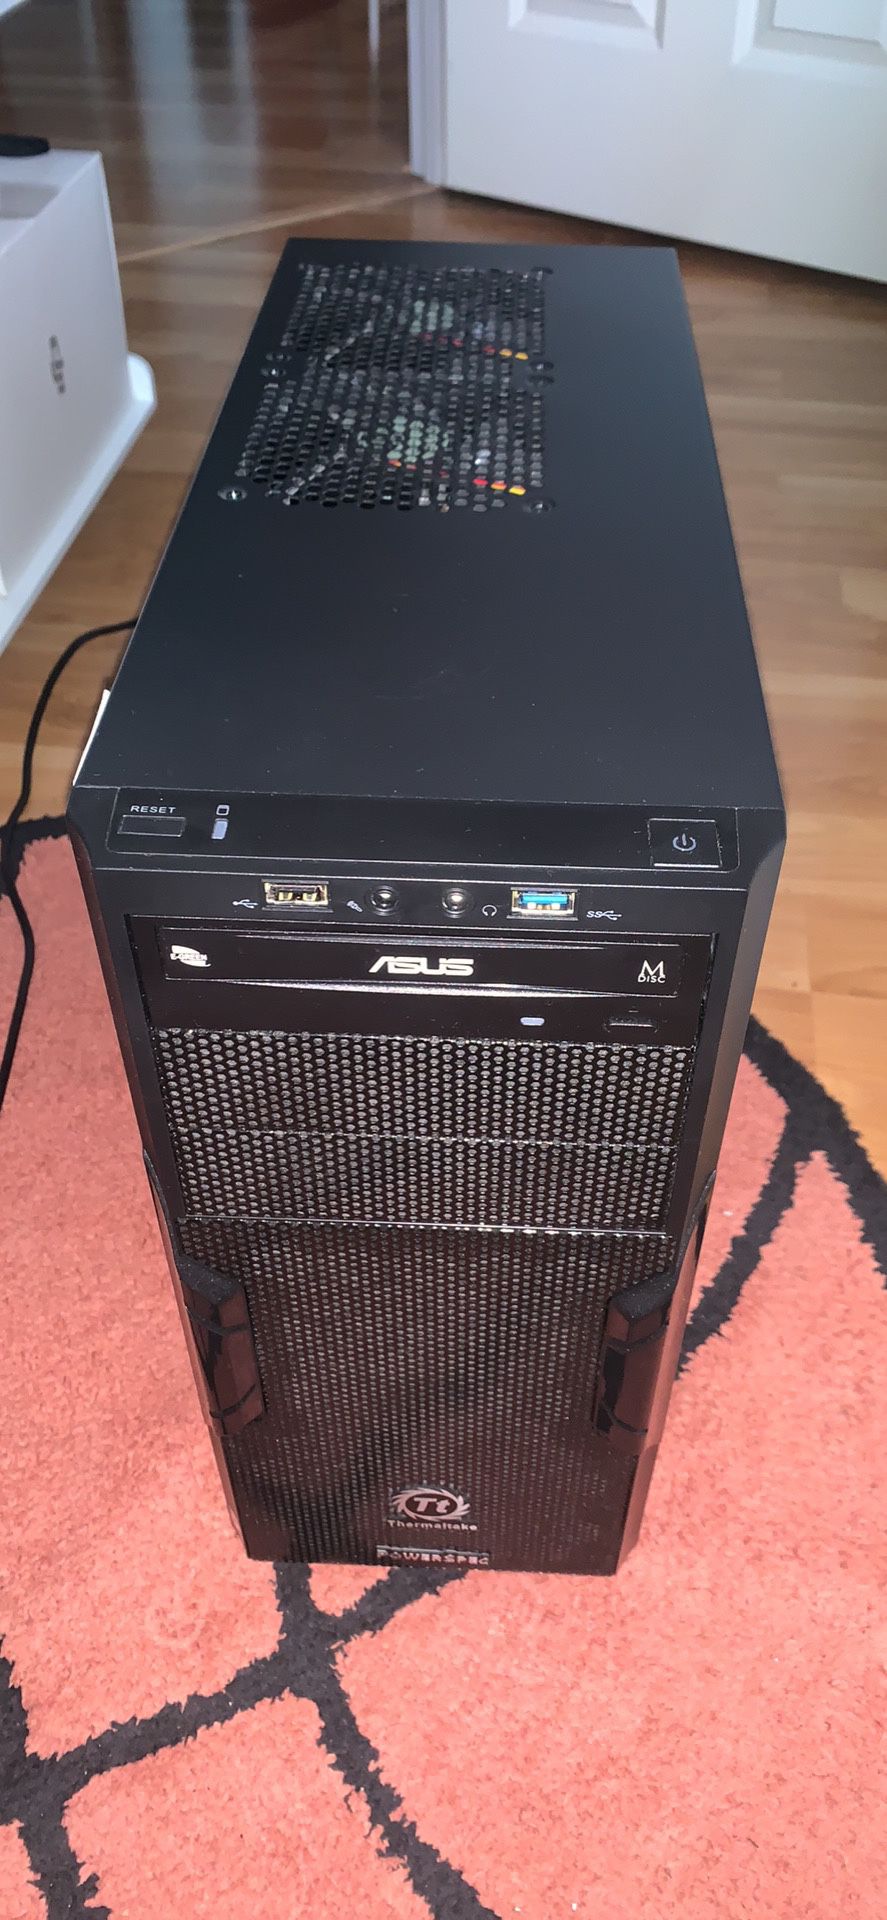 PowerSpec G221 Desktop Computer for Video Editing, Gaming, Etc - Like New Condition